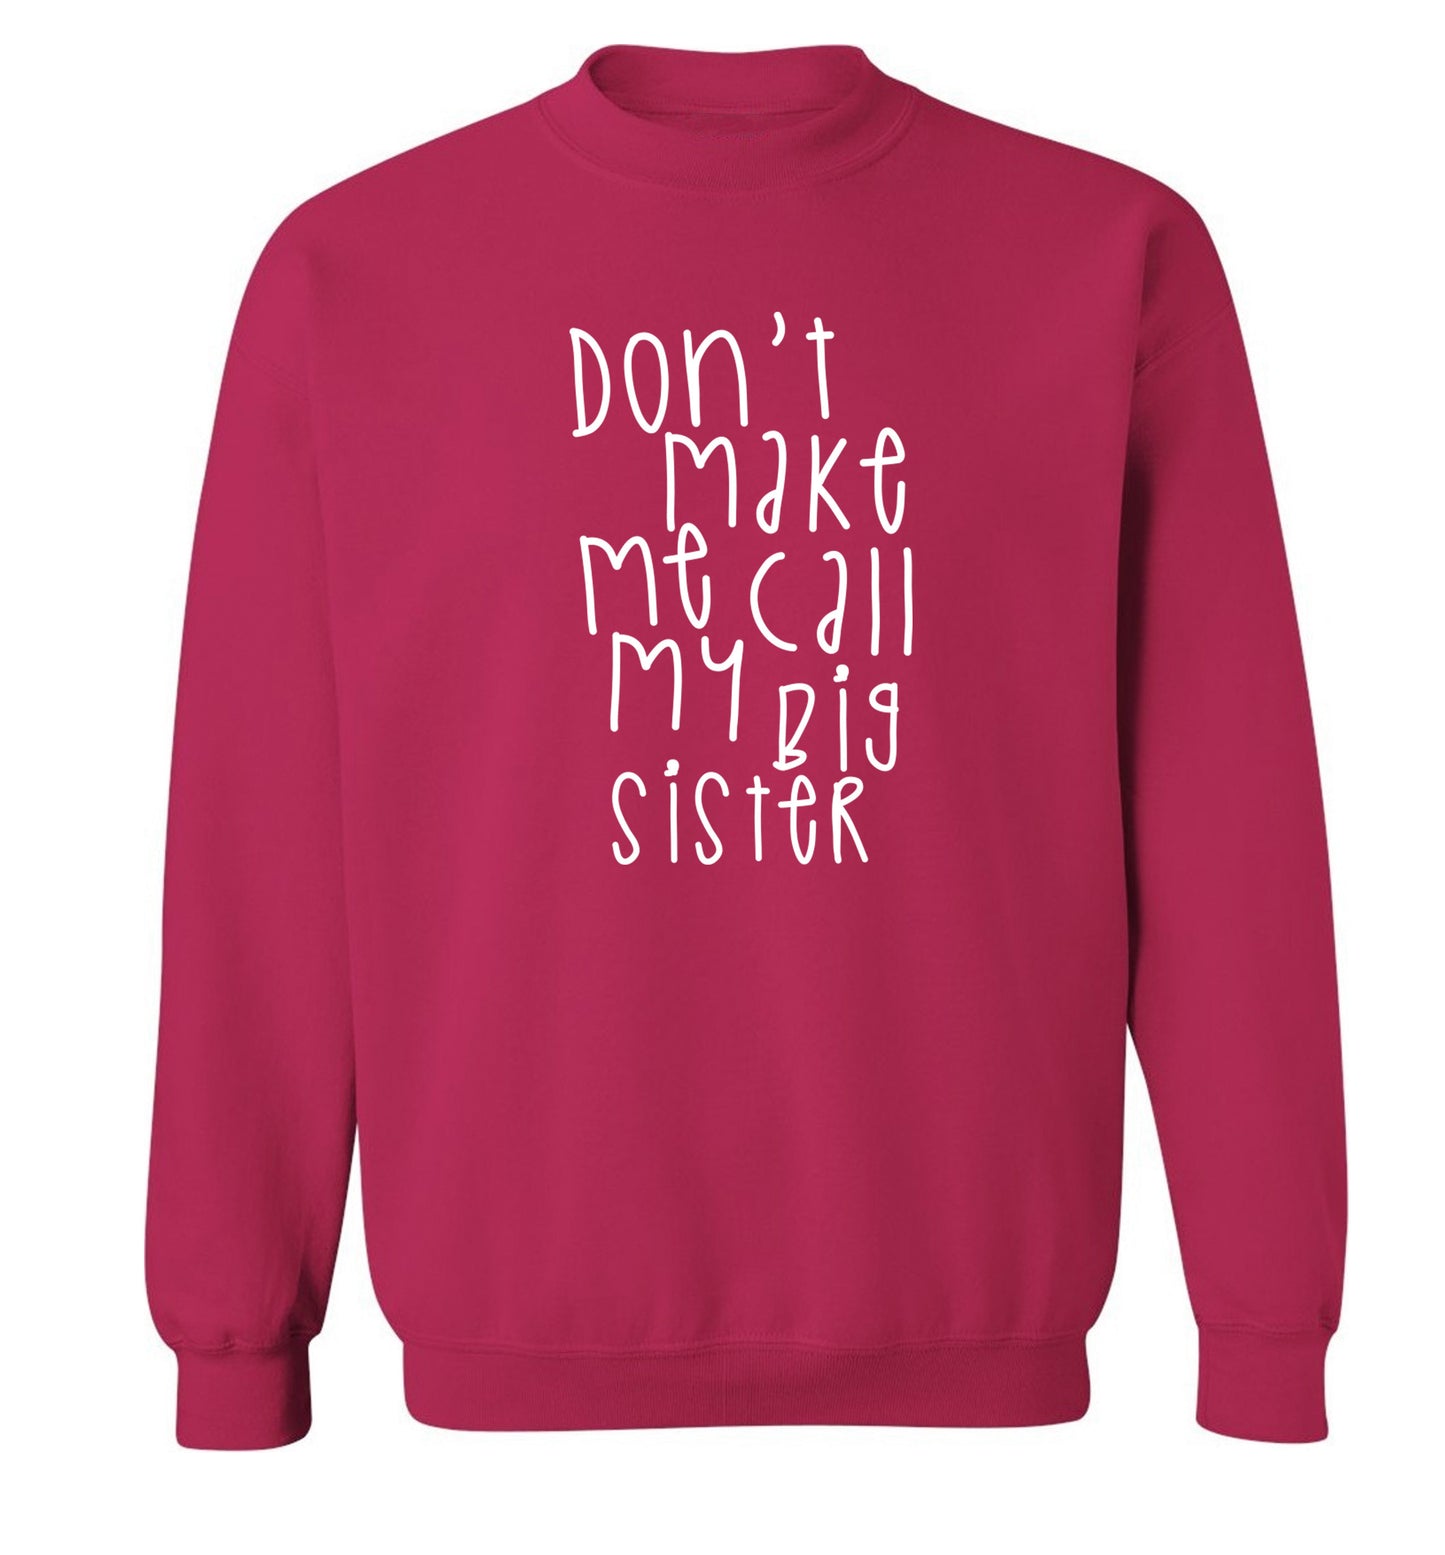 Don't make me call my big sister Adult's unisex pink Sweater 2XL